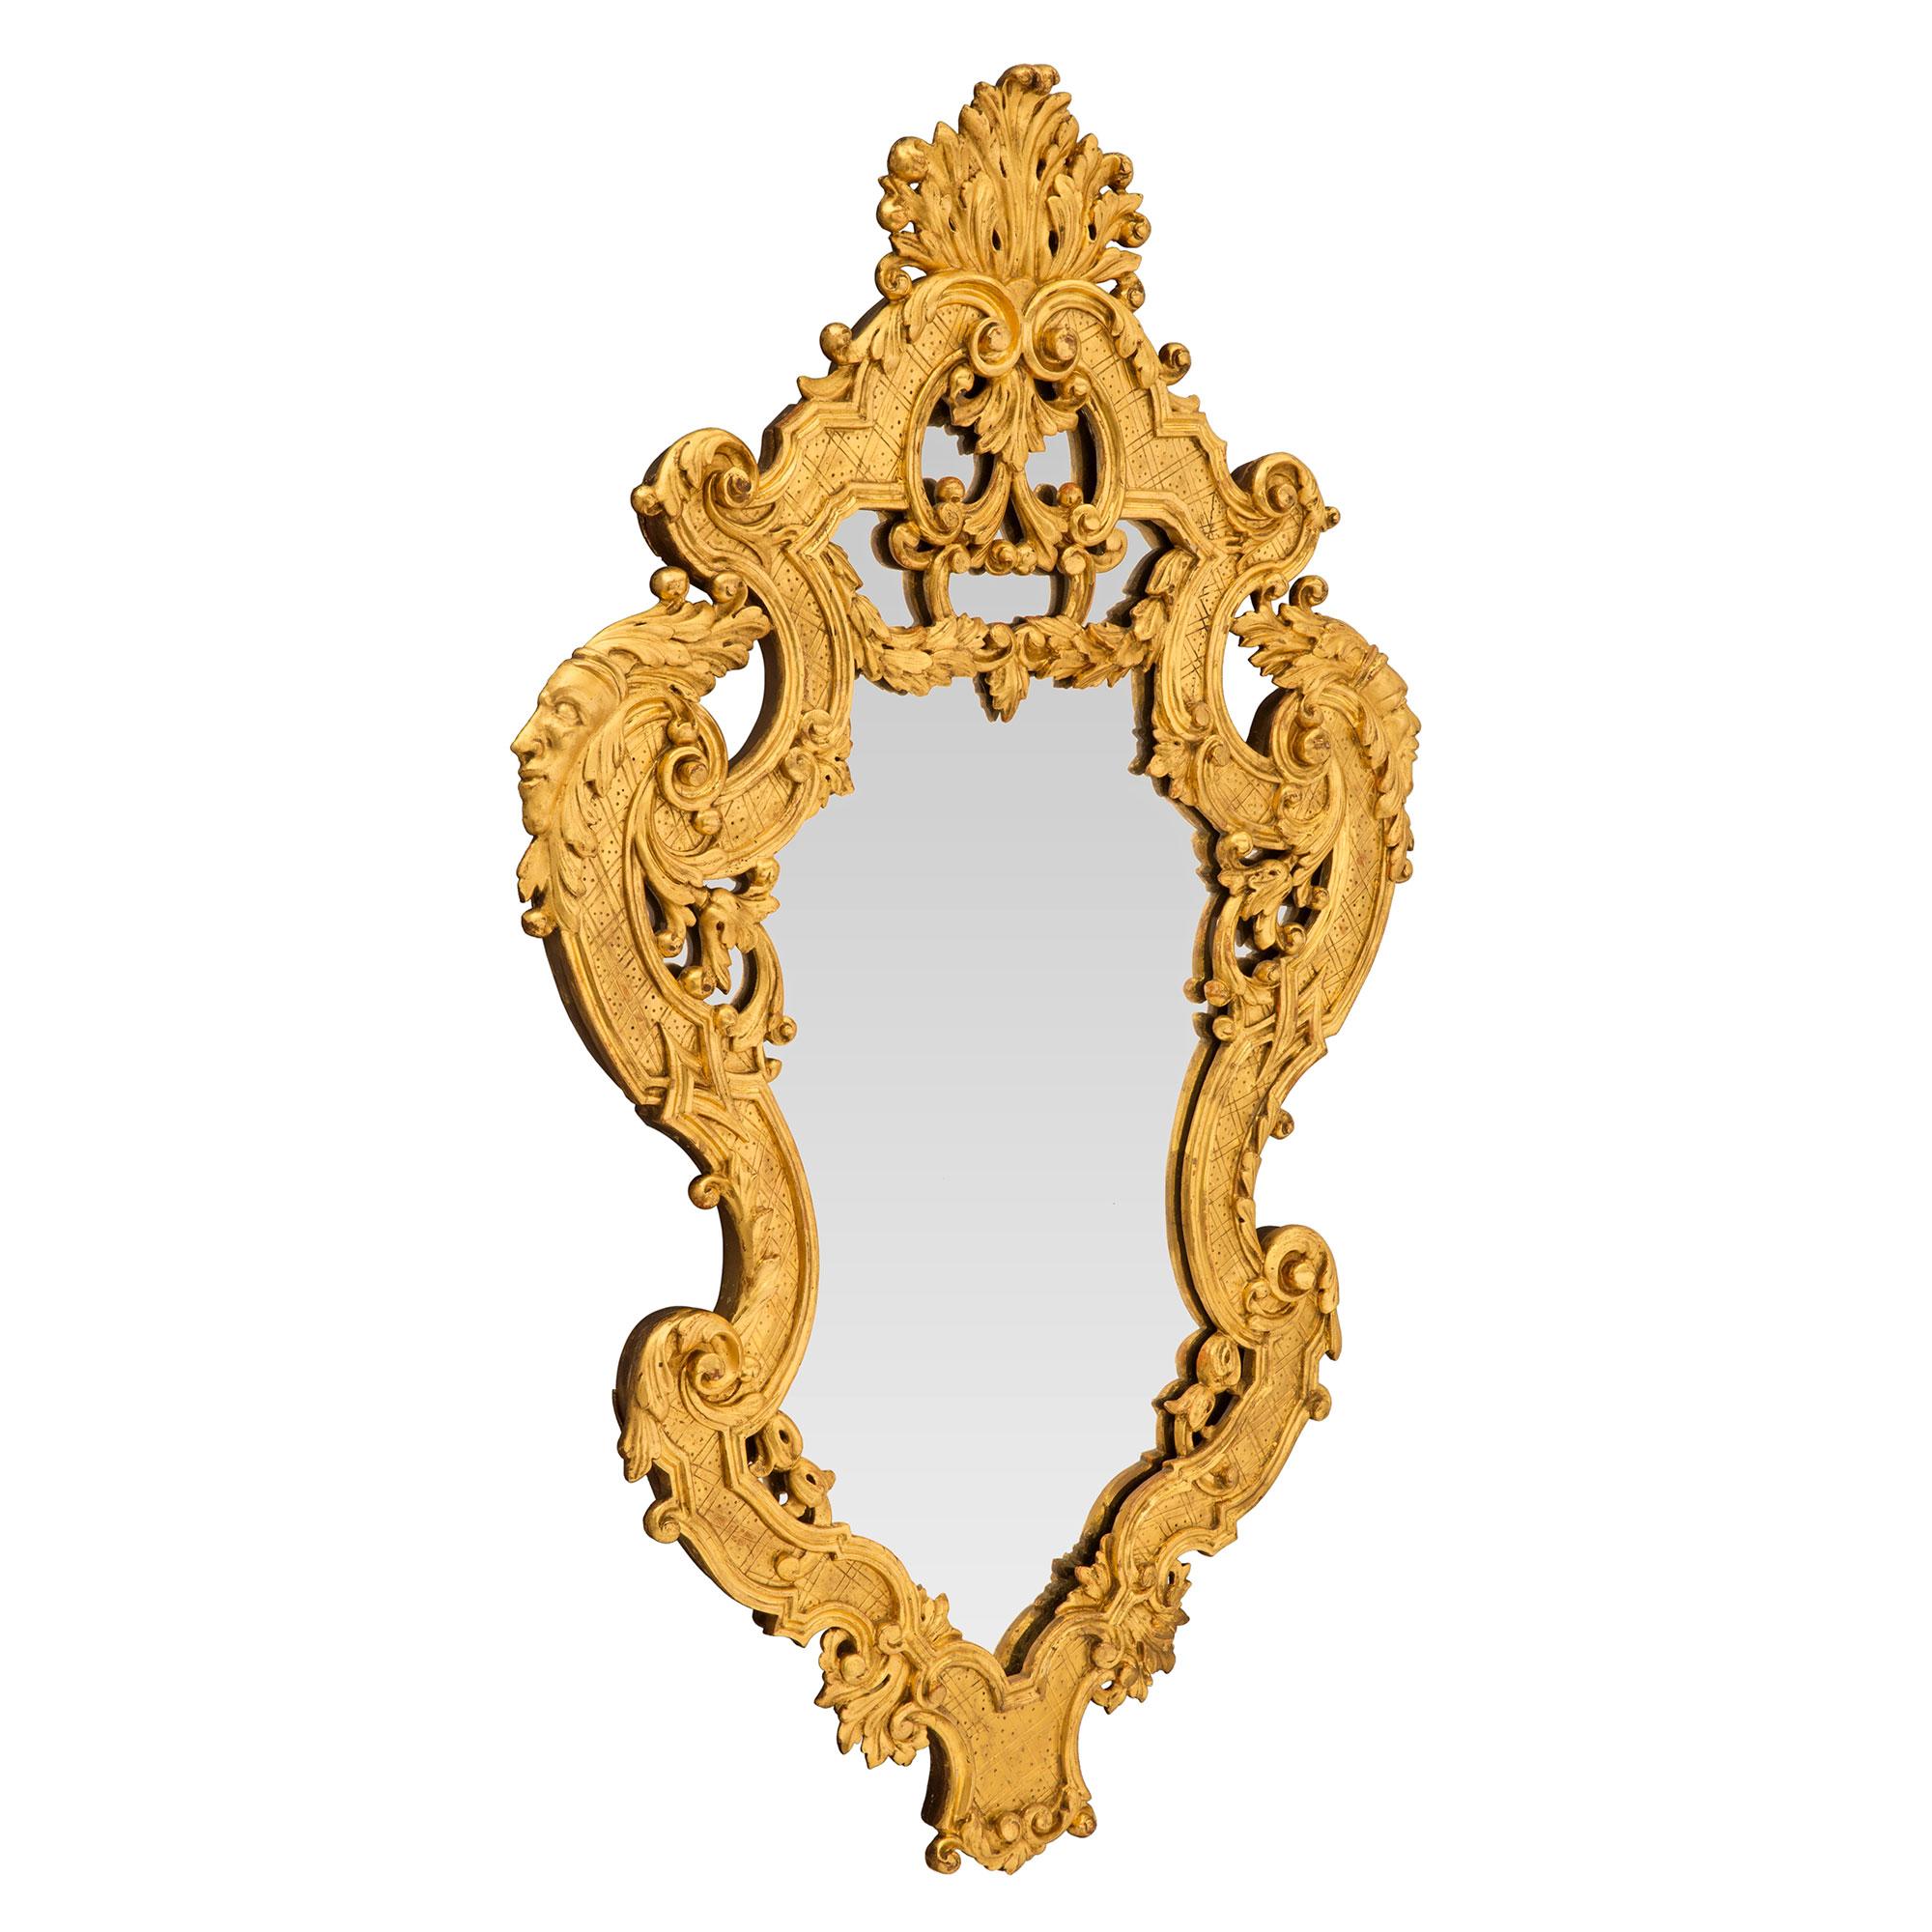 An exquisite pair of Italian early 19th century Régence st. giltwood mirrors. The original mirror plates are set within striking and most decorative richly scrolled movements adorned with large richly carved acanthus leaves. Beautiful lattice